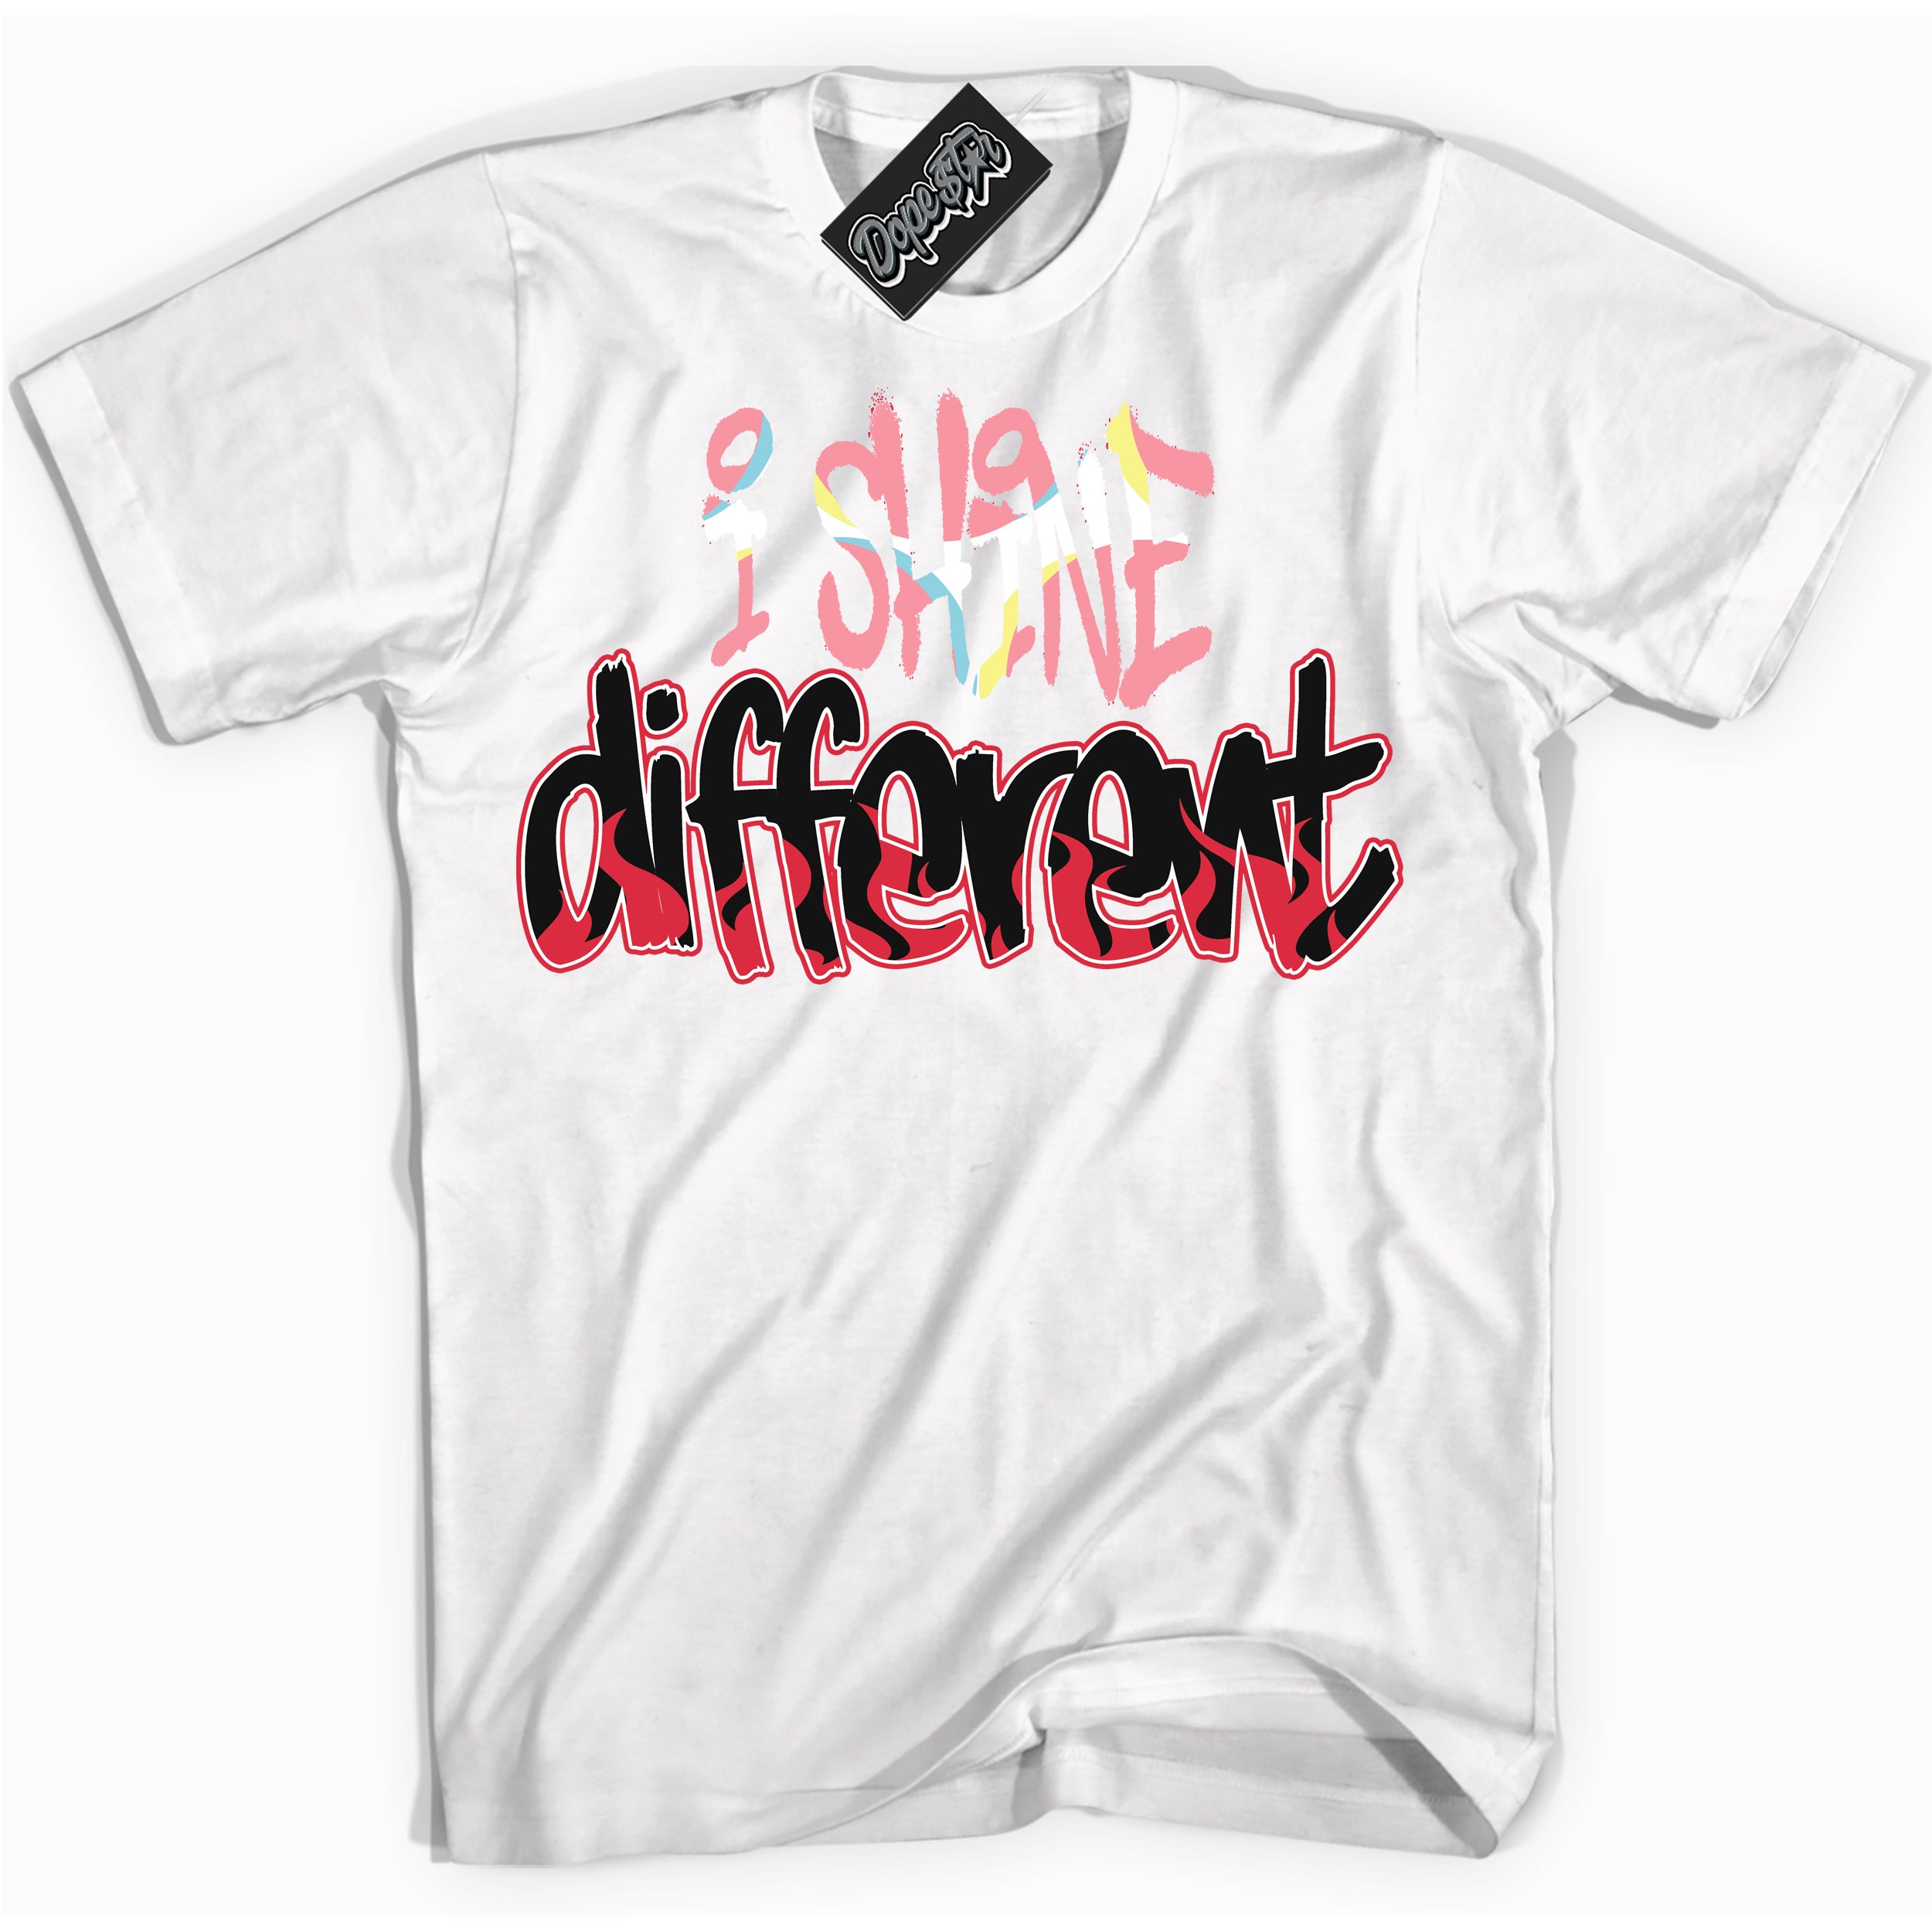 Cool White graphic tee with “ I Shine Different ” design, that perfectly matches Spider-Verse 1s sneakers 